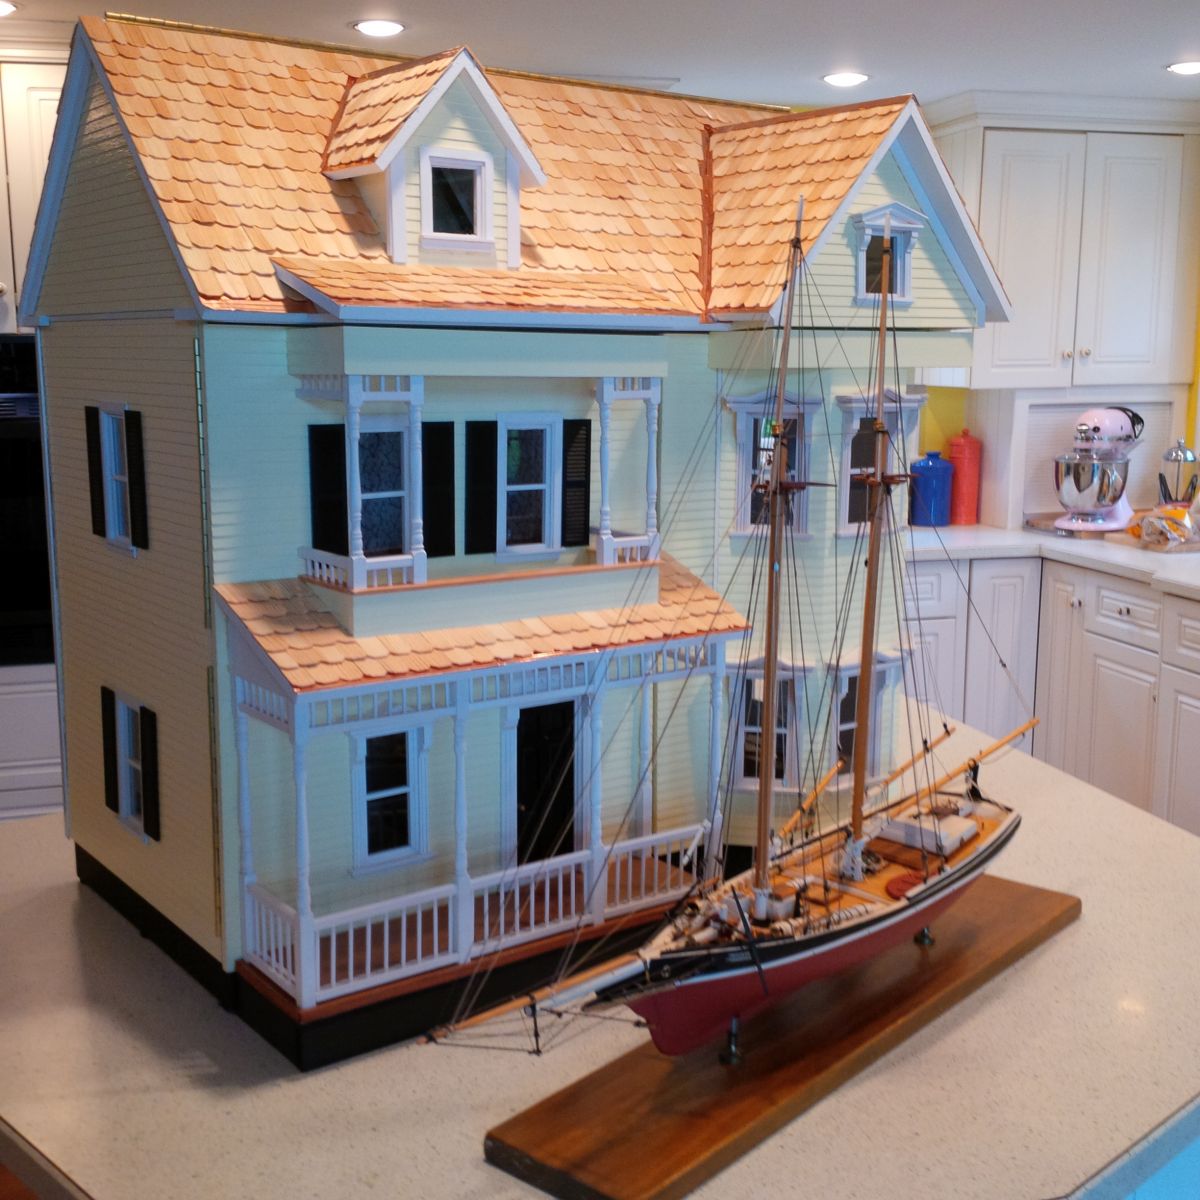 My wife complained I spent to much time on boats. I built her a doll house. Everyone happy now!!!!